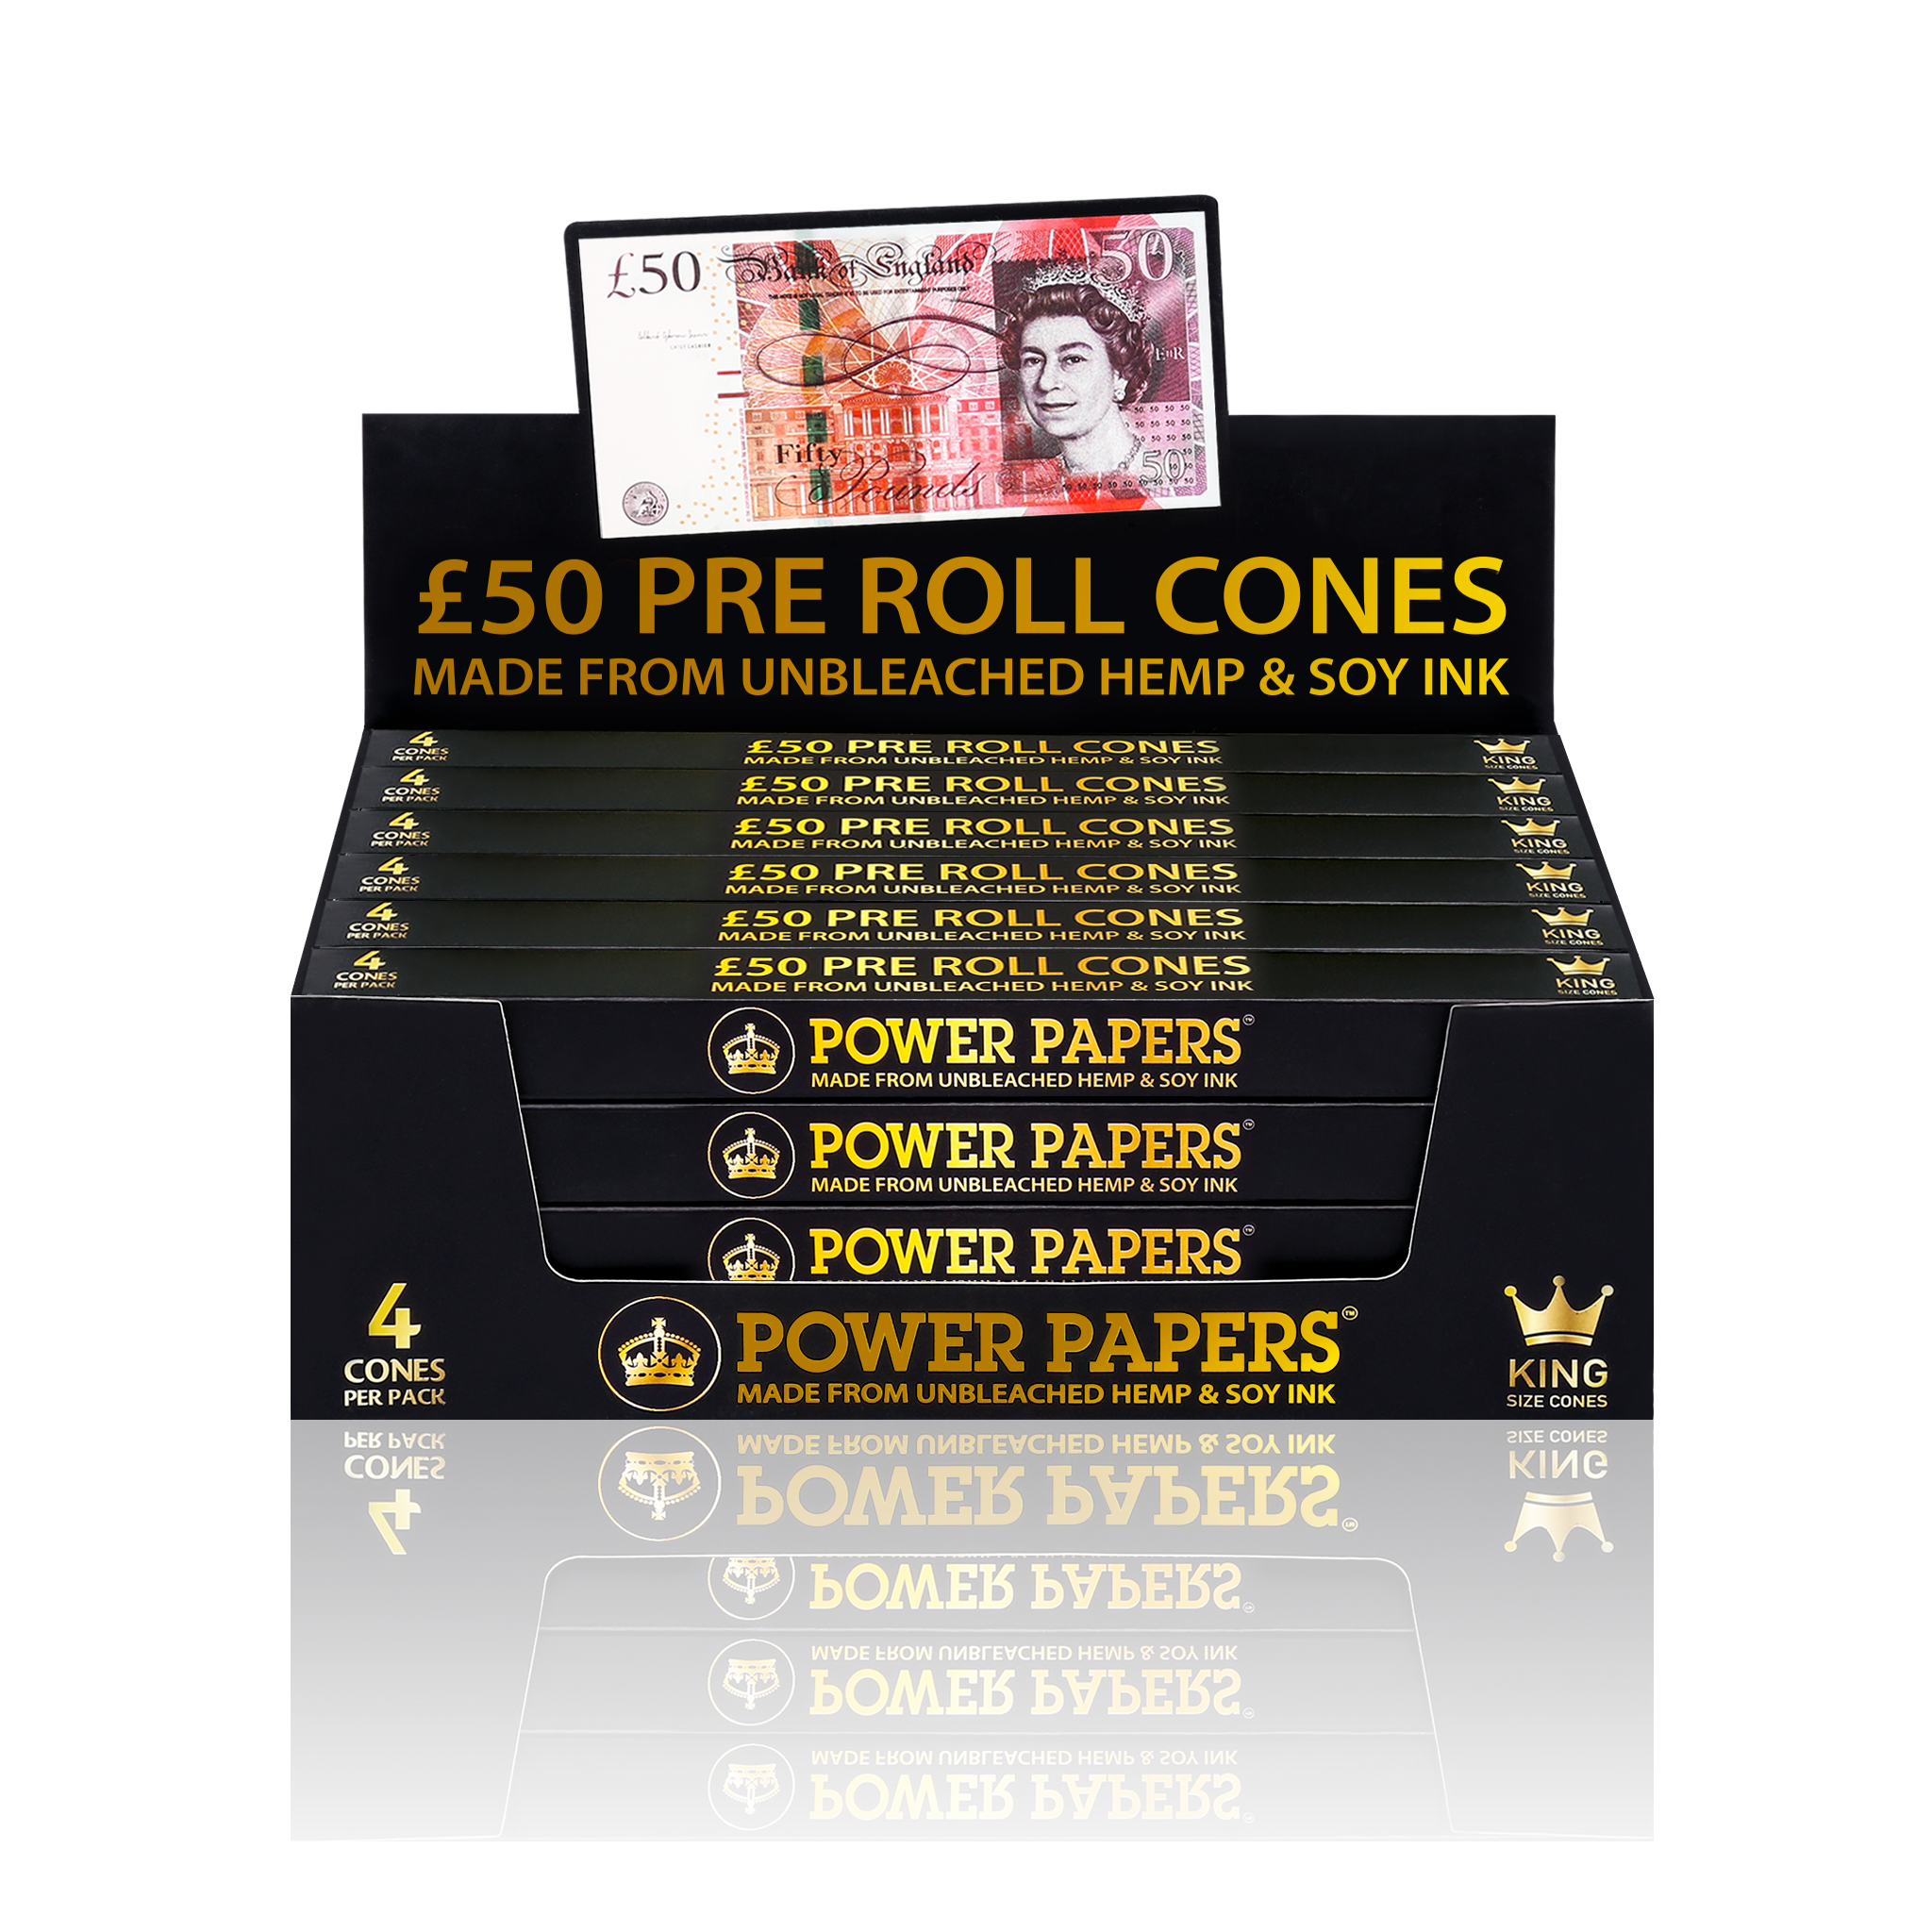 POWER PAPERS™ GBP£50 Pre Rolled Cones